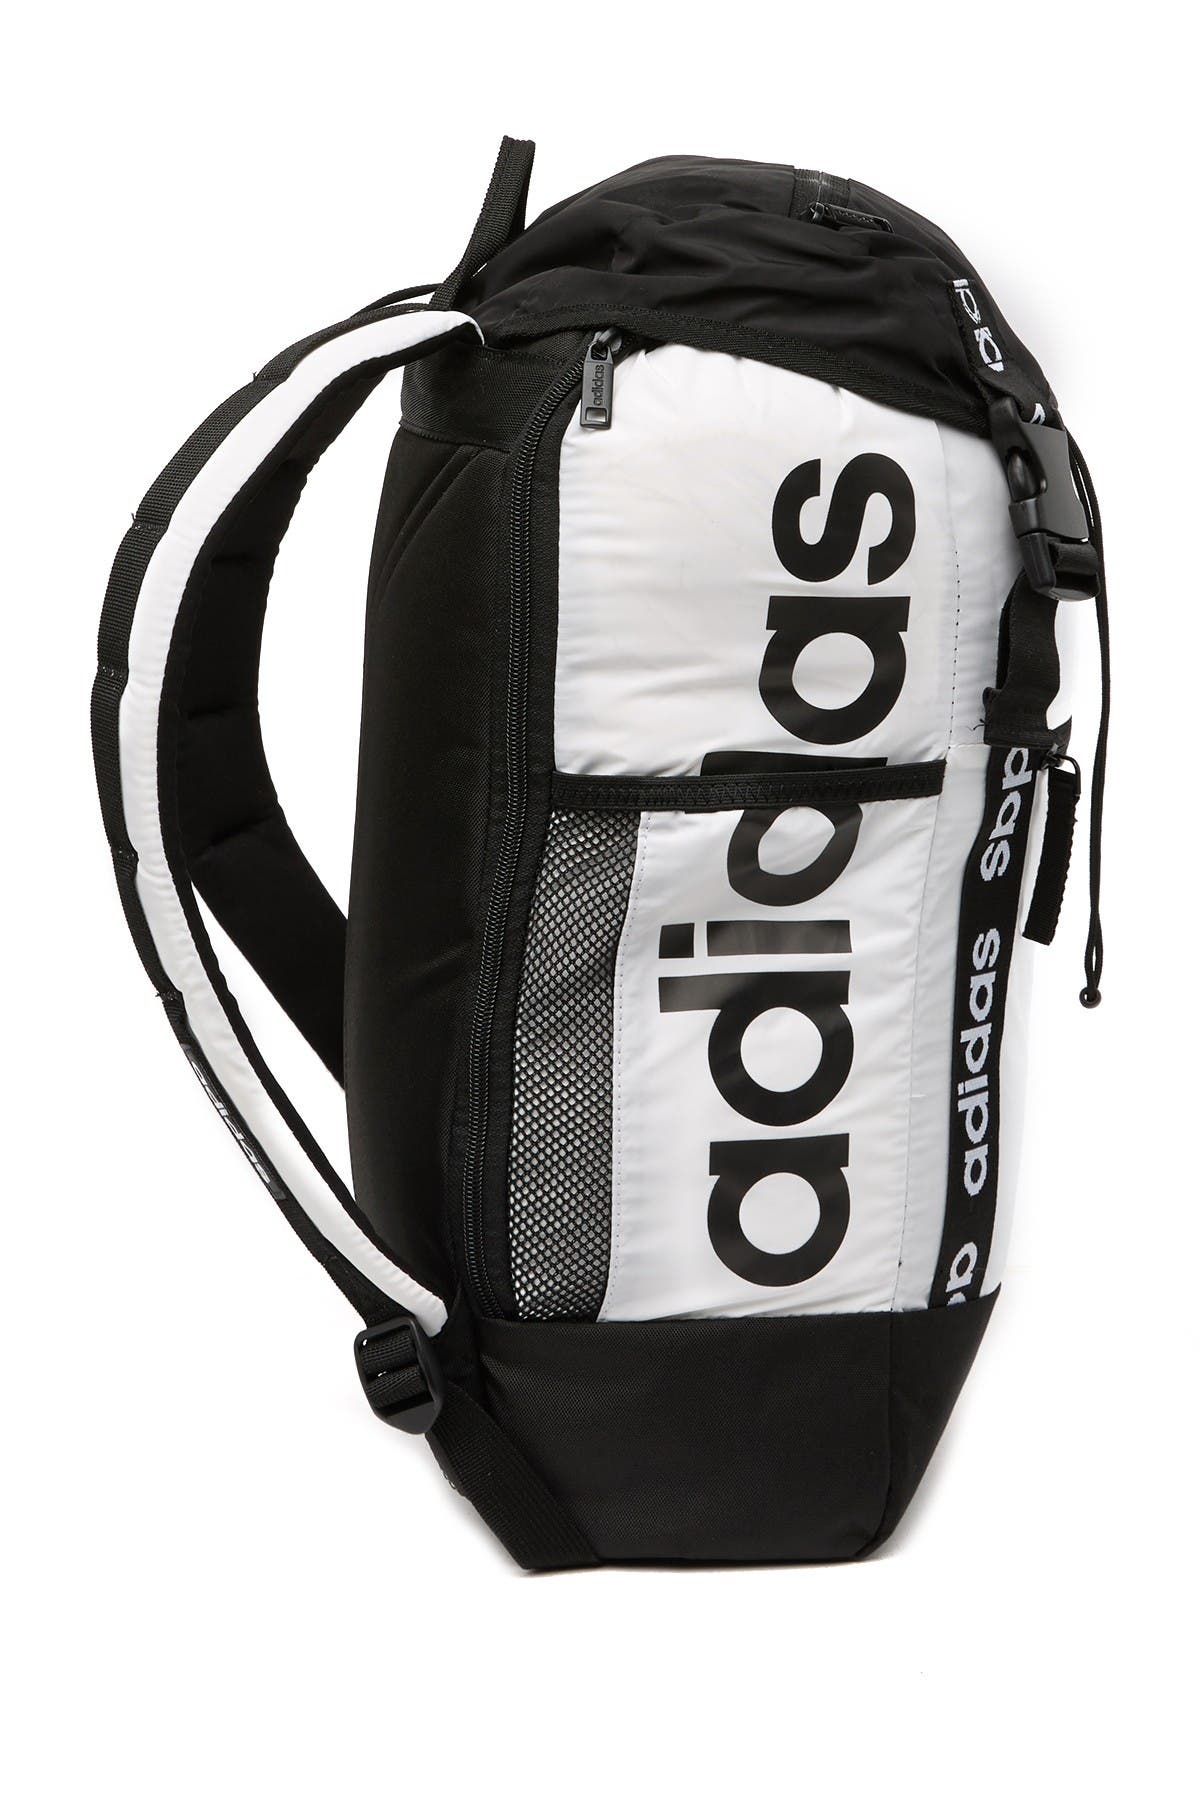 adidas midvale backpack